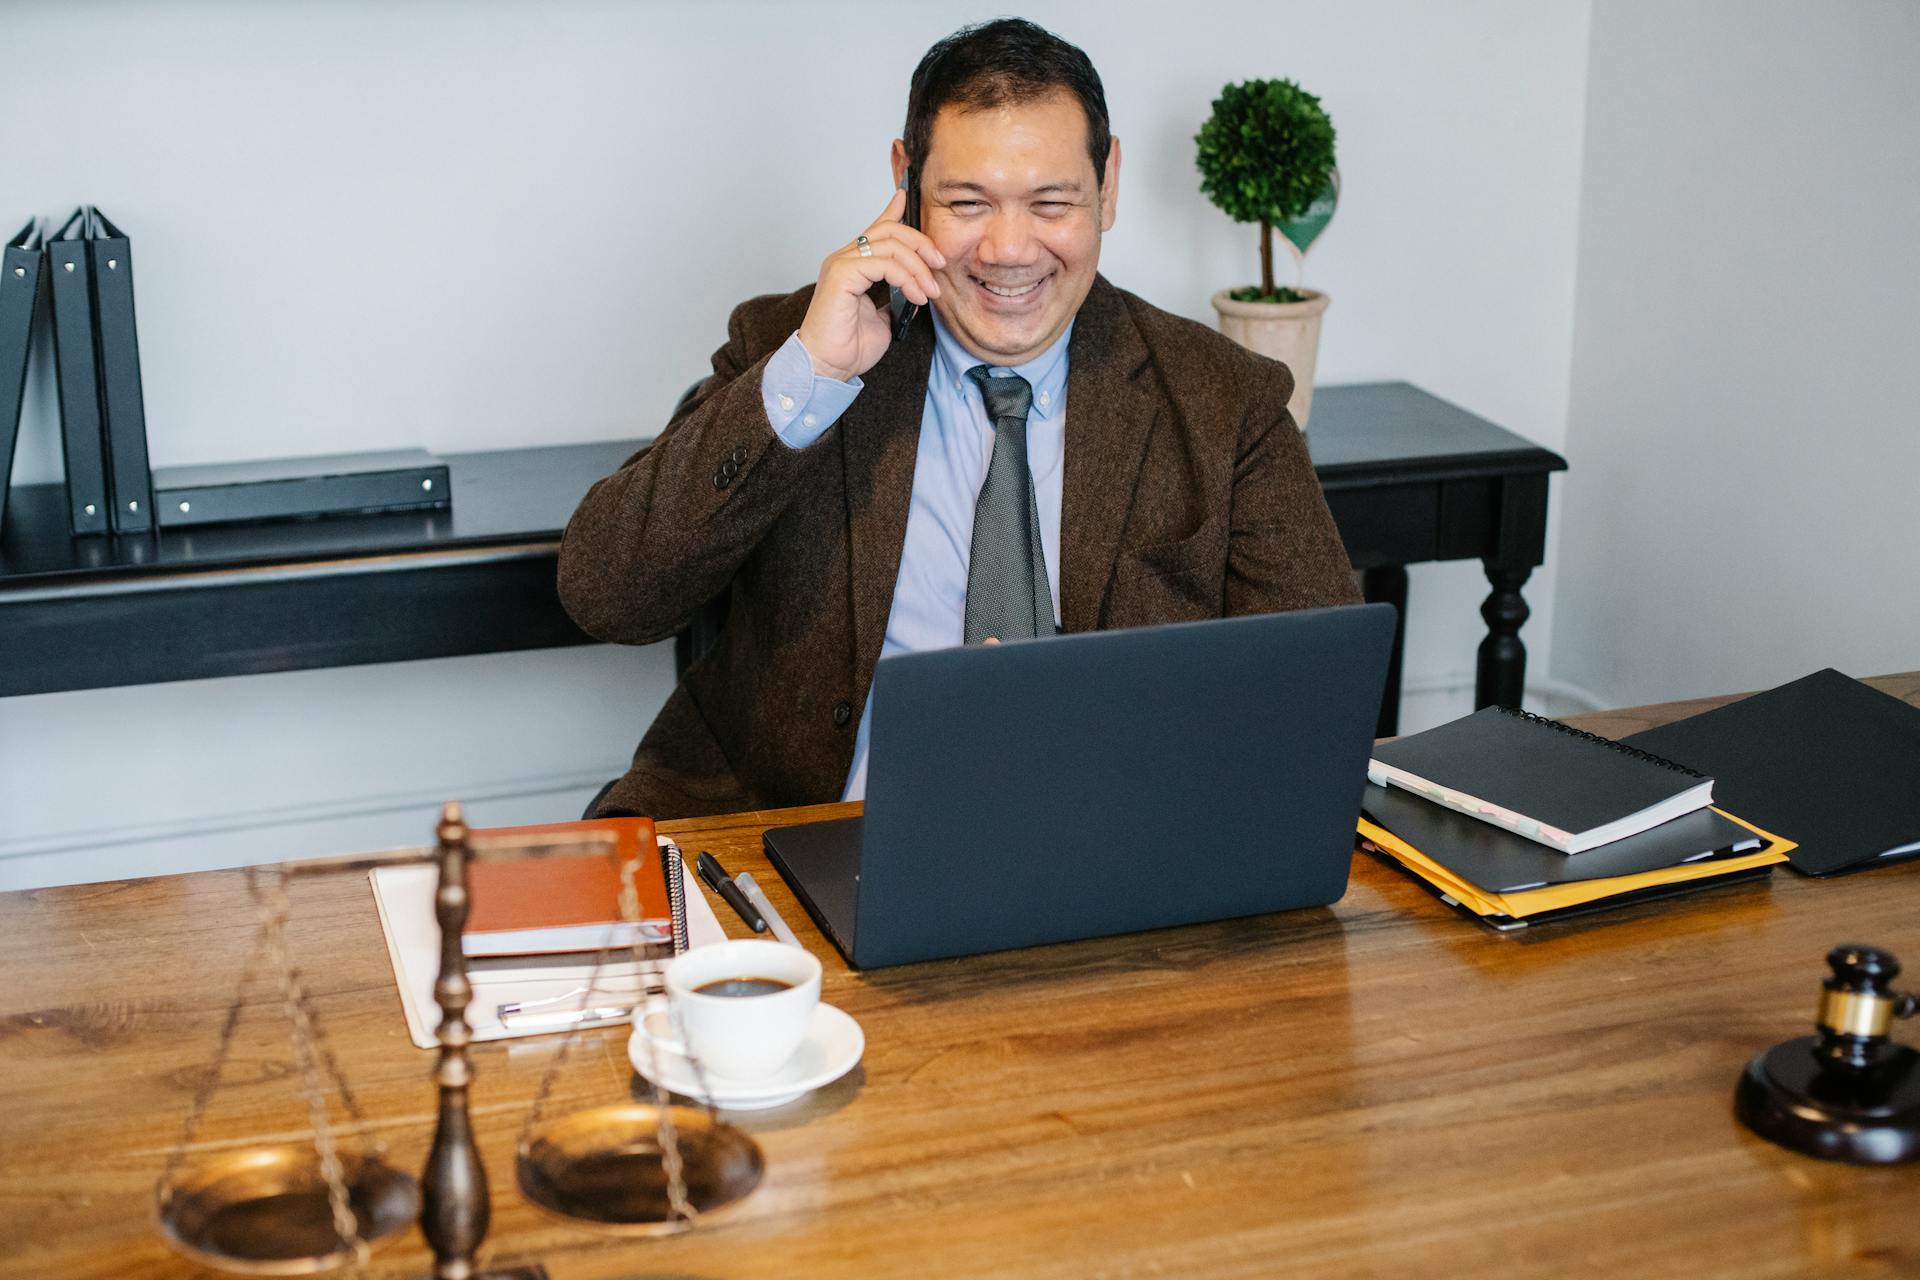 A lawyer talking on the phone in his office | Source: Pexels